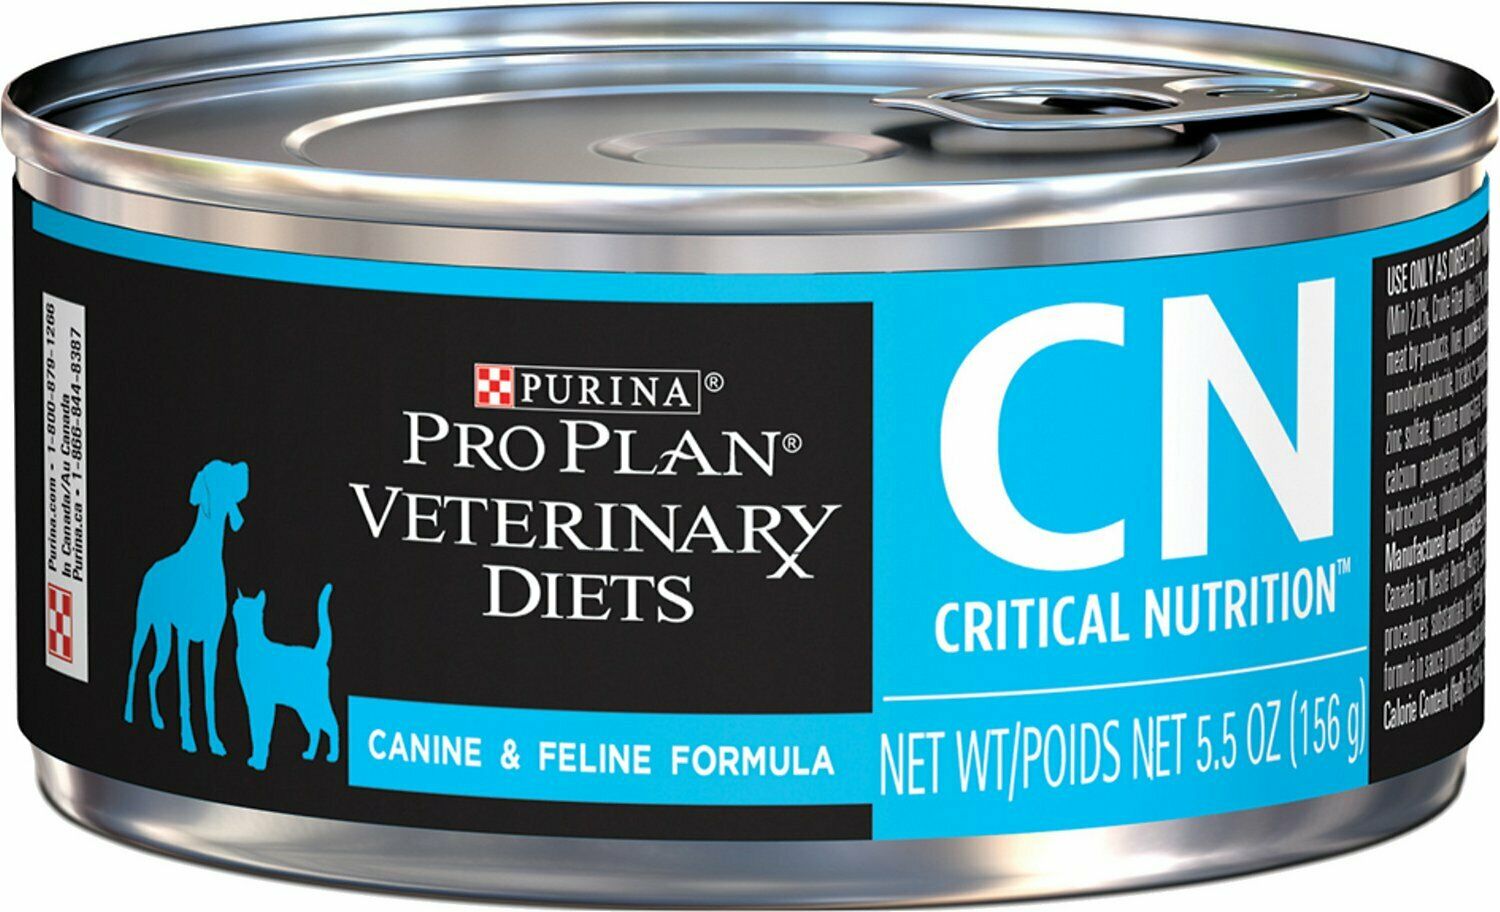 Purina Veterinary Diets Dog Food Cn [critical Nutrition] (24 Cans)